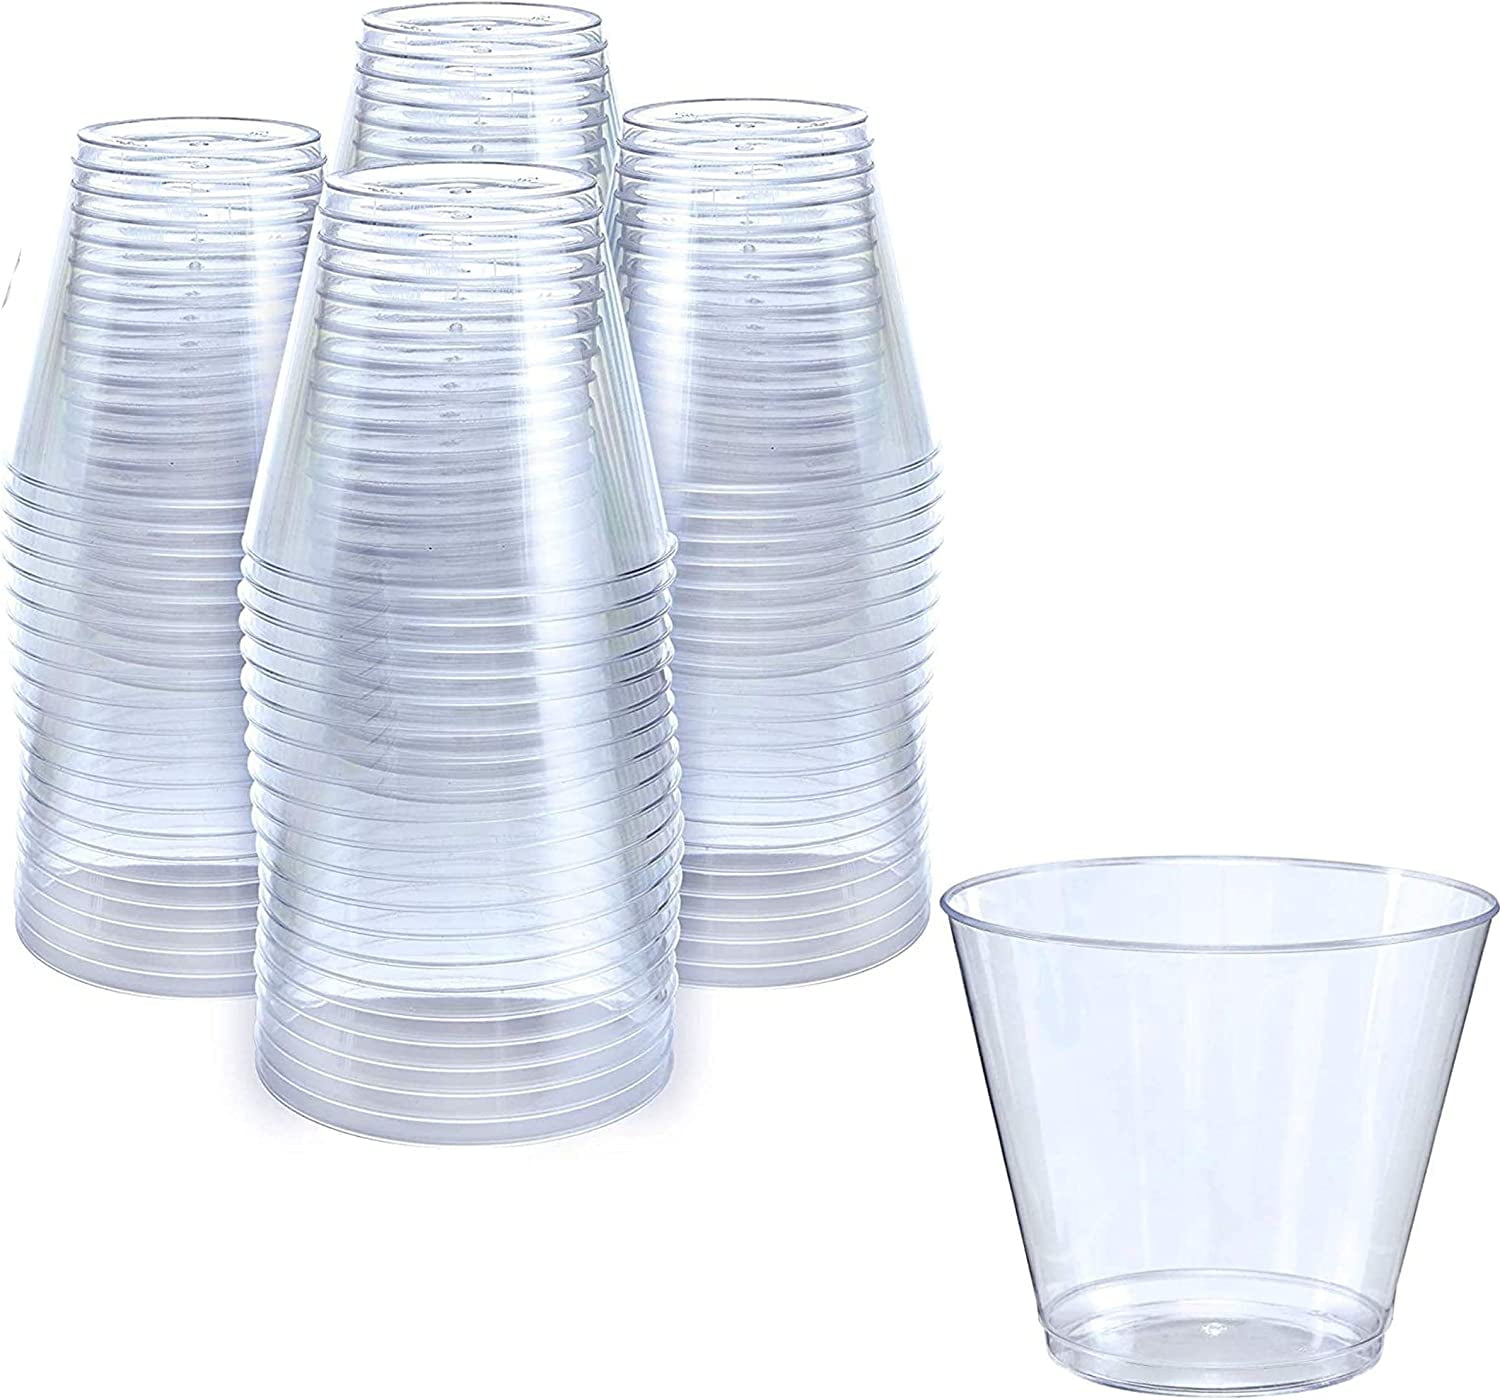 Great Value Everyday Disposable Plastic Cups, Clear, 2 oz, 50 count